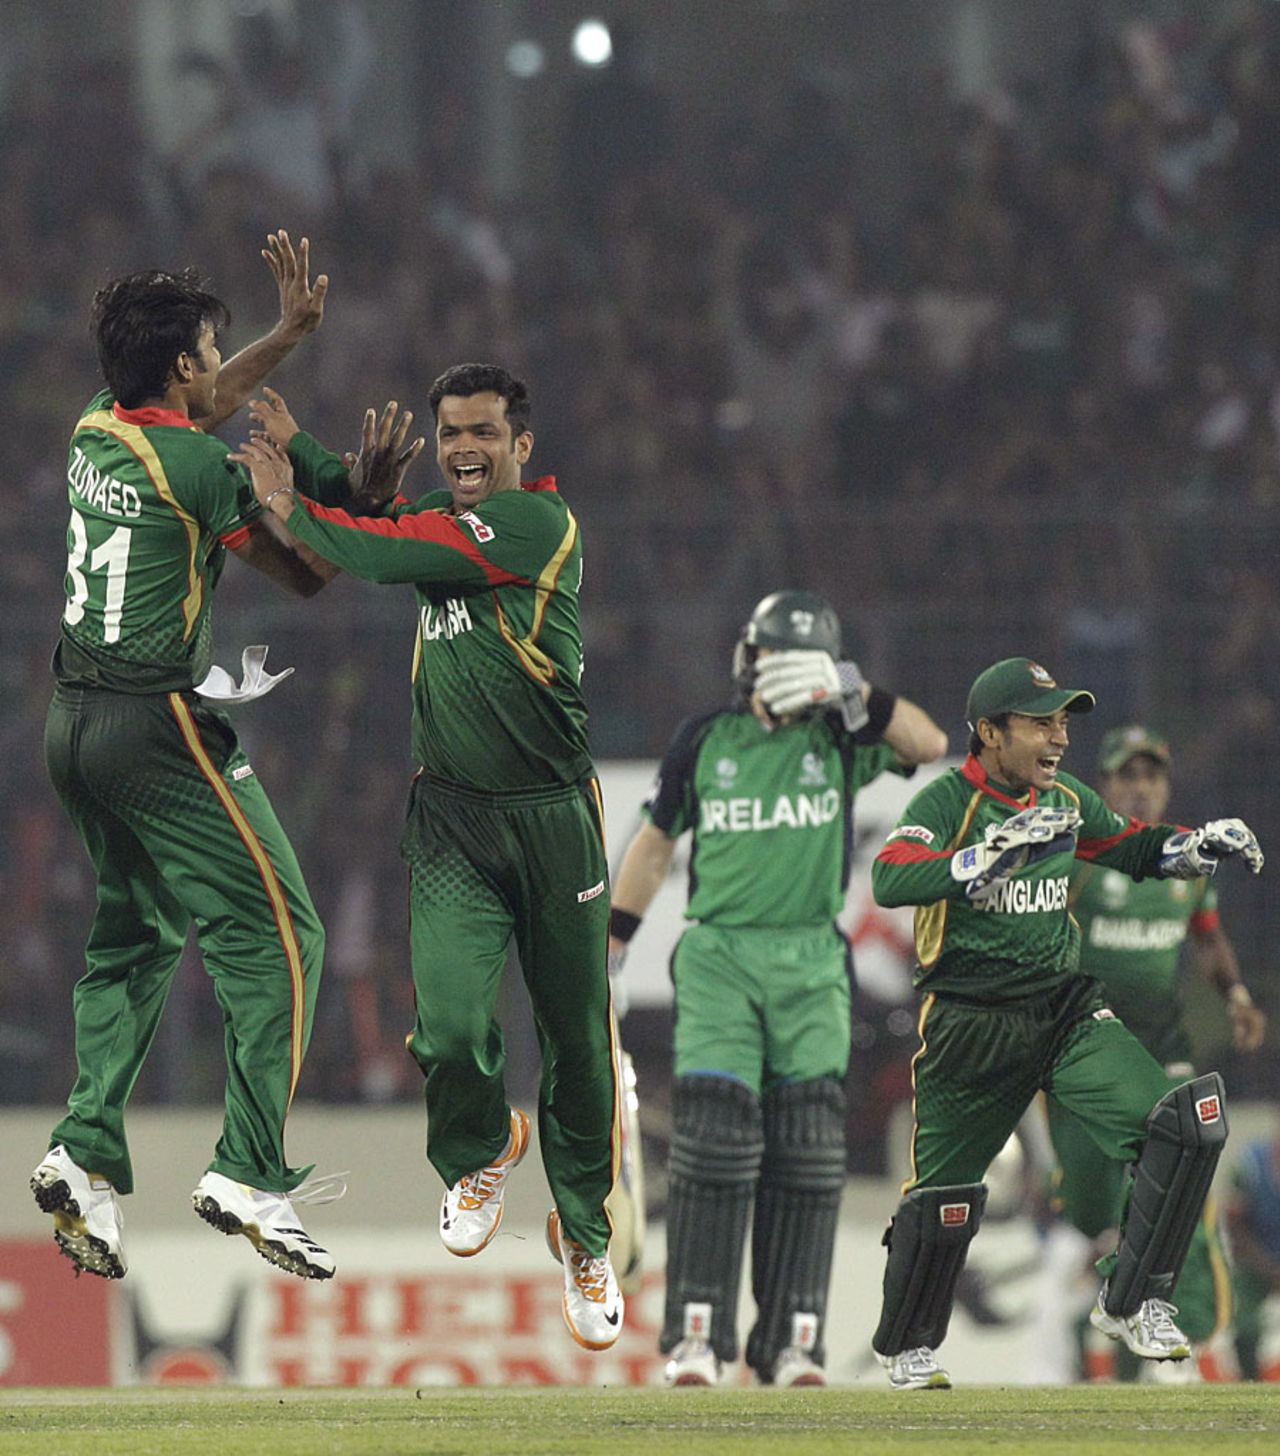 Abdur Razzak got the early wicket Bangladesh needed with Paul Stirling out stumped, Bangladesh v Ireland, World Cup 2011, Mirpur, February 25, 2010
